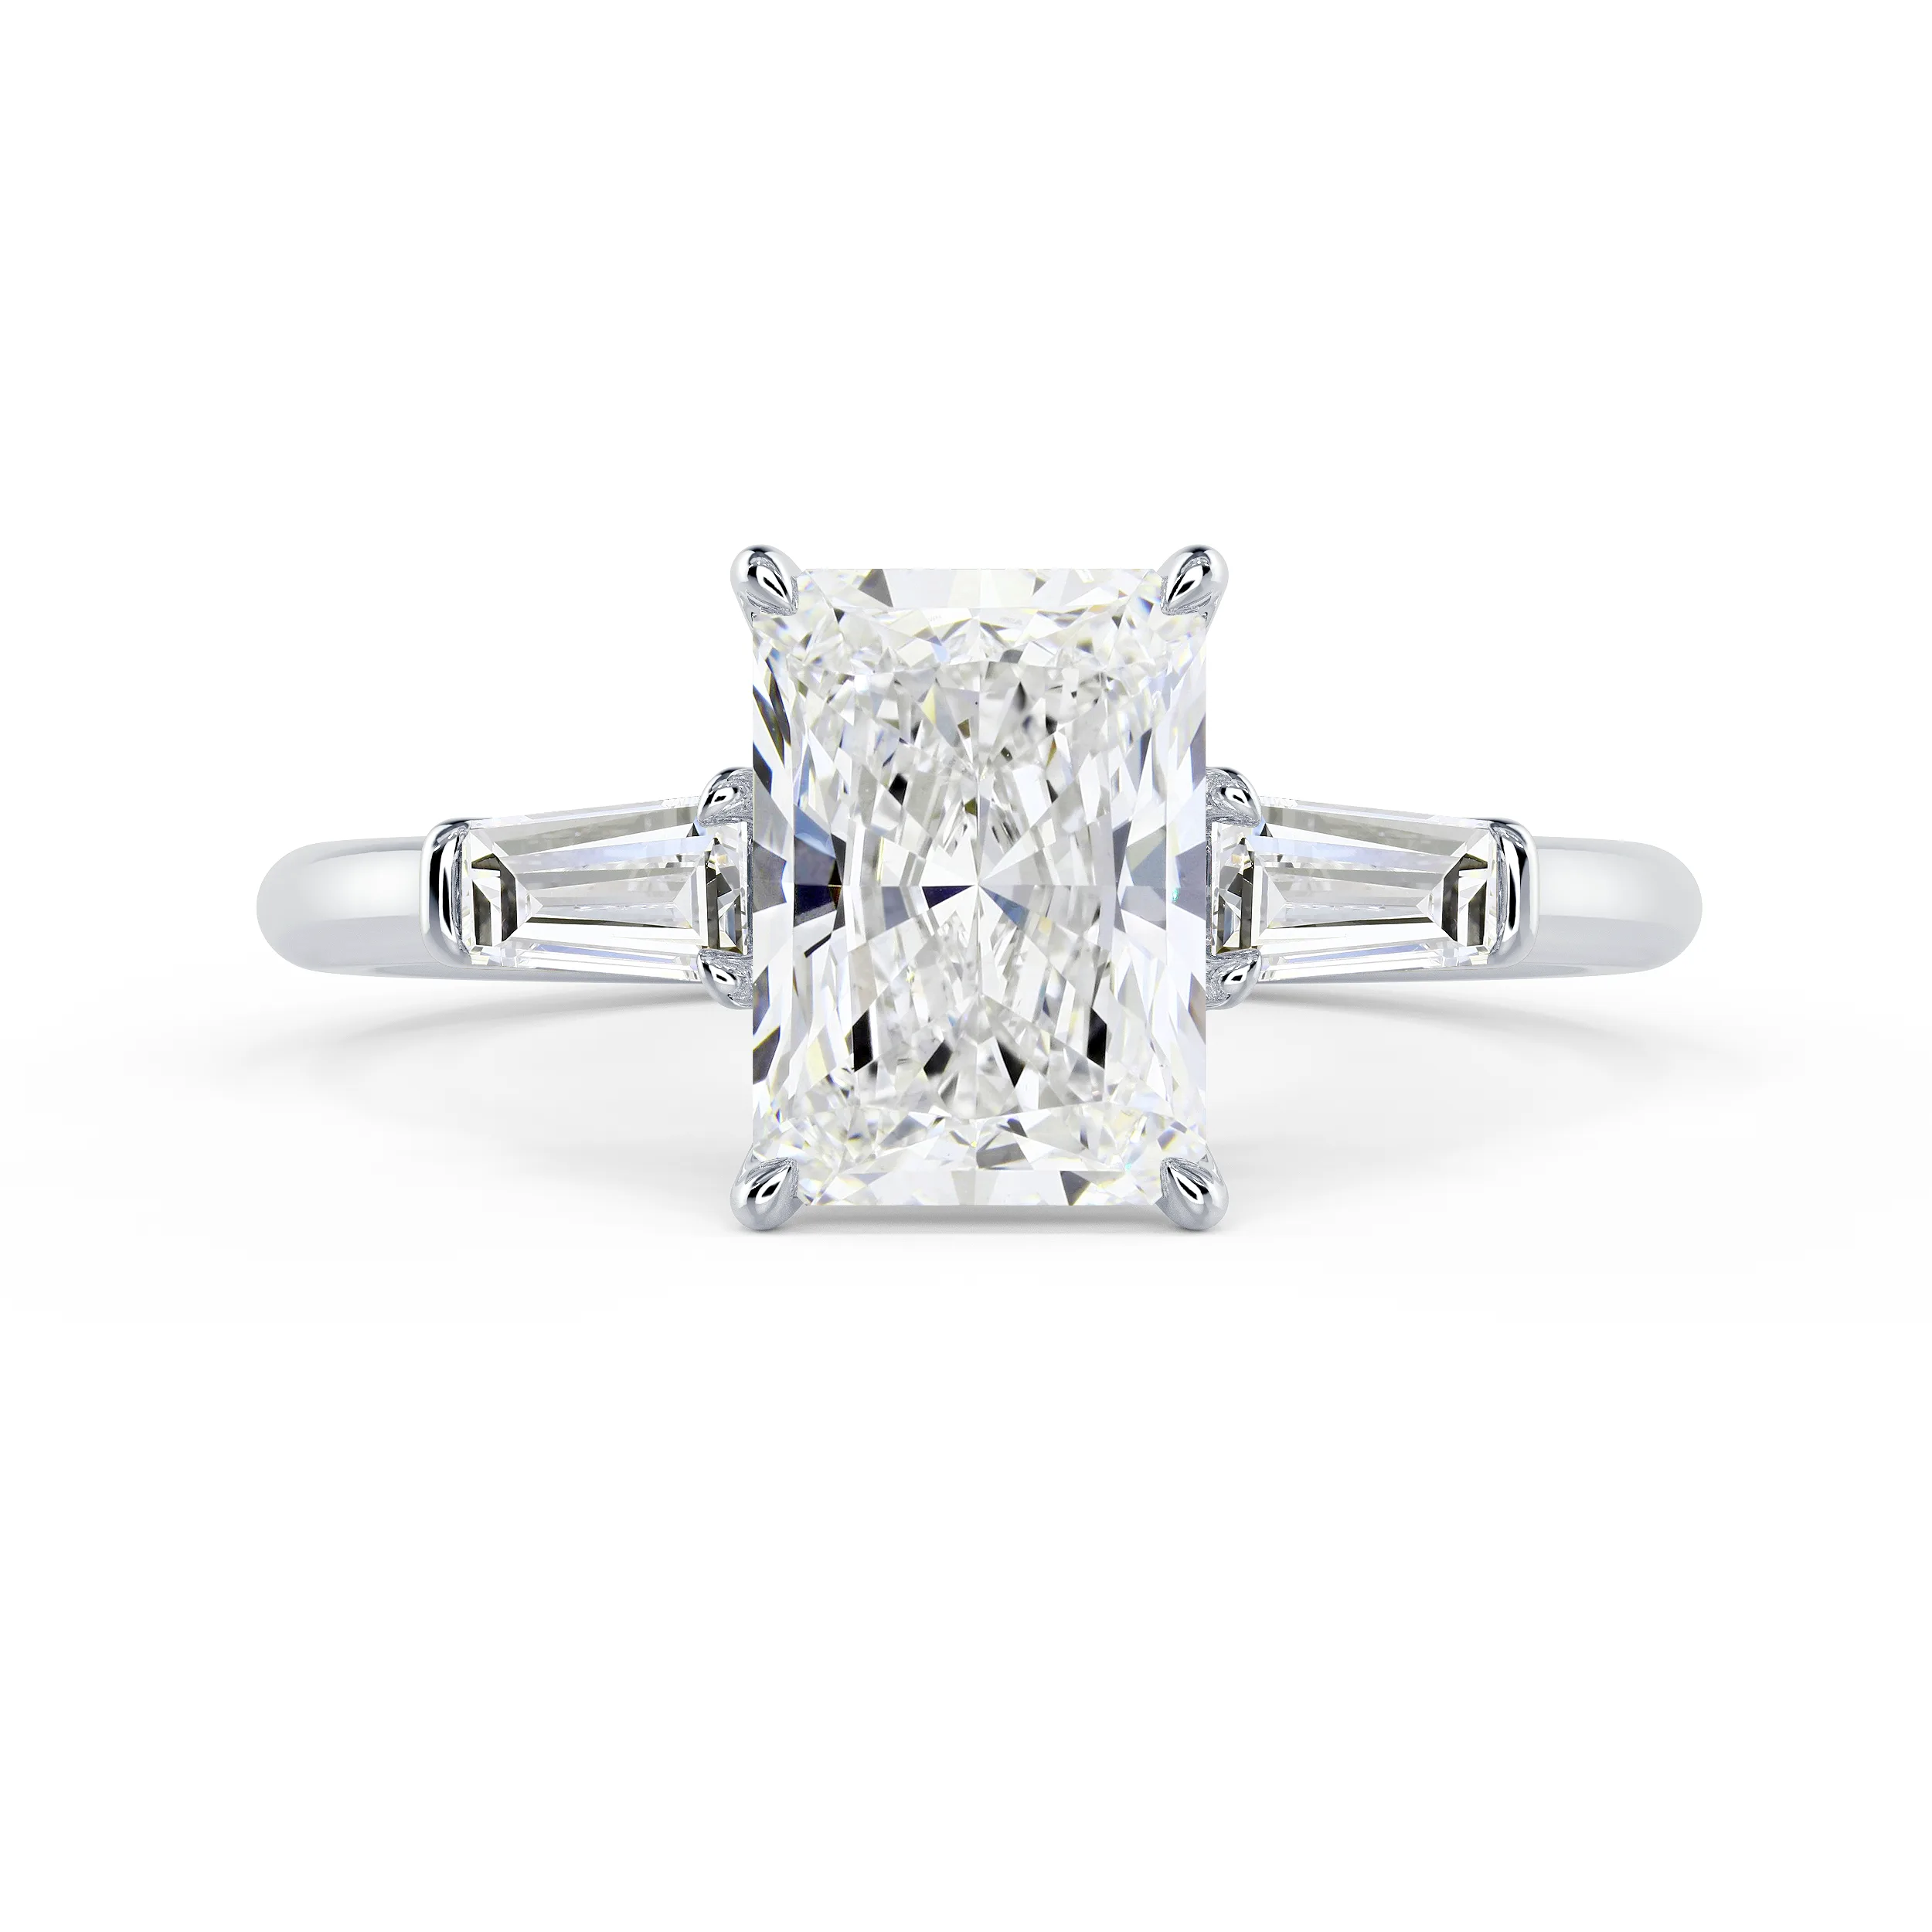 Exceptional Quality Lab Diamonds Radiant and Baguette Diamond Engagement Ring in White Gold (Main View)